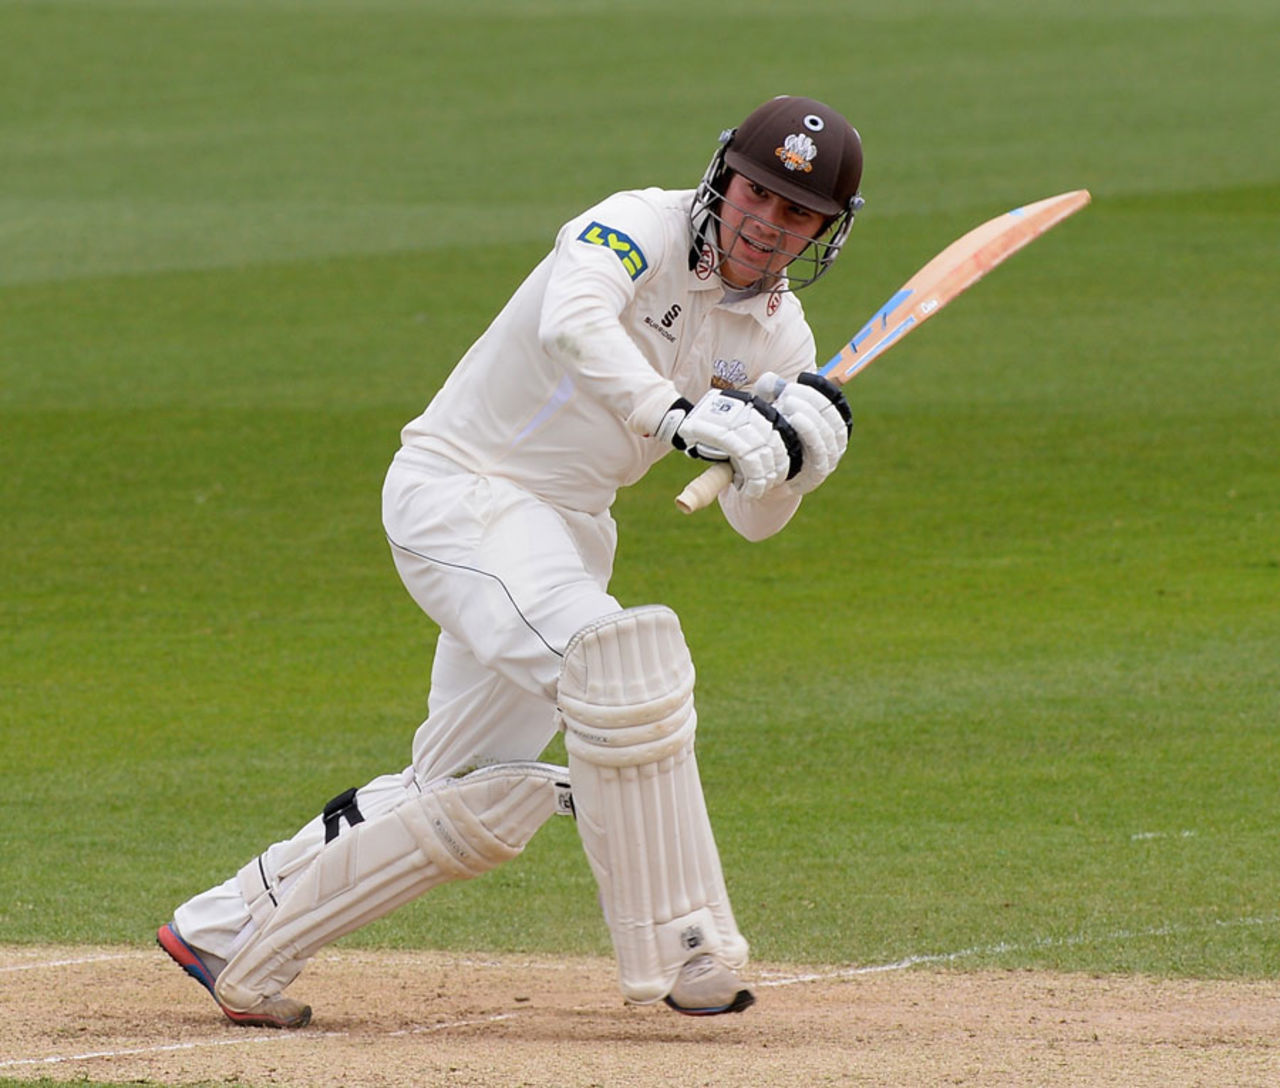 Rory Burns started solidly opening the batting, Surrey v Somerset, County Championship, Division One, The Oval, 2nd day, April 18, 2013